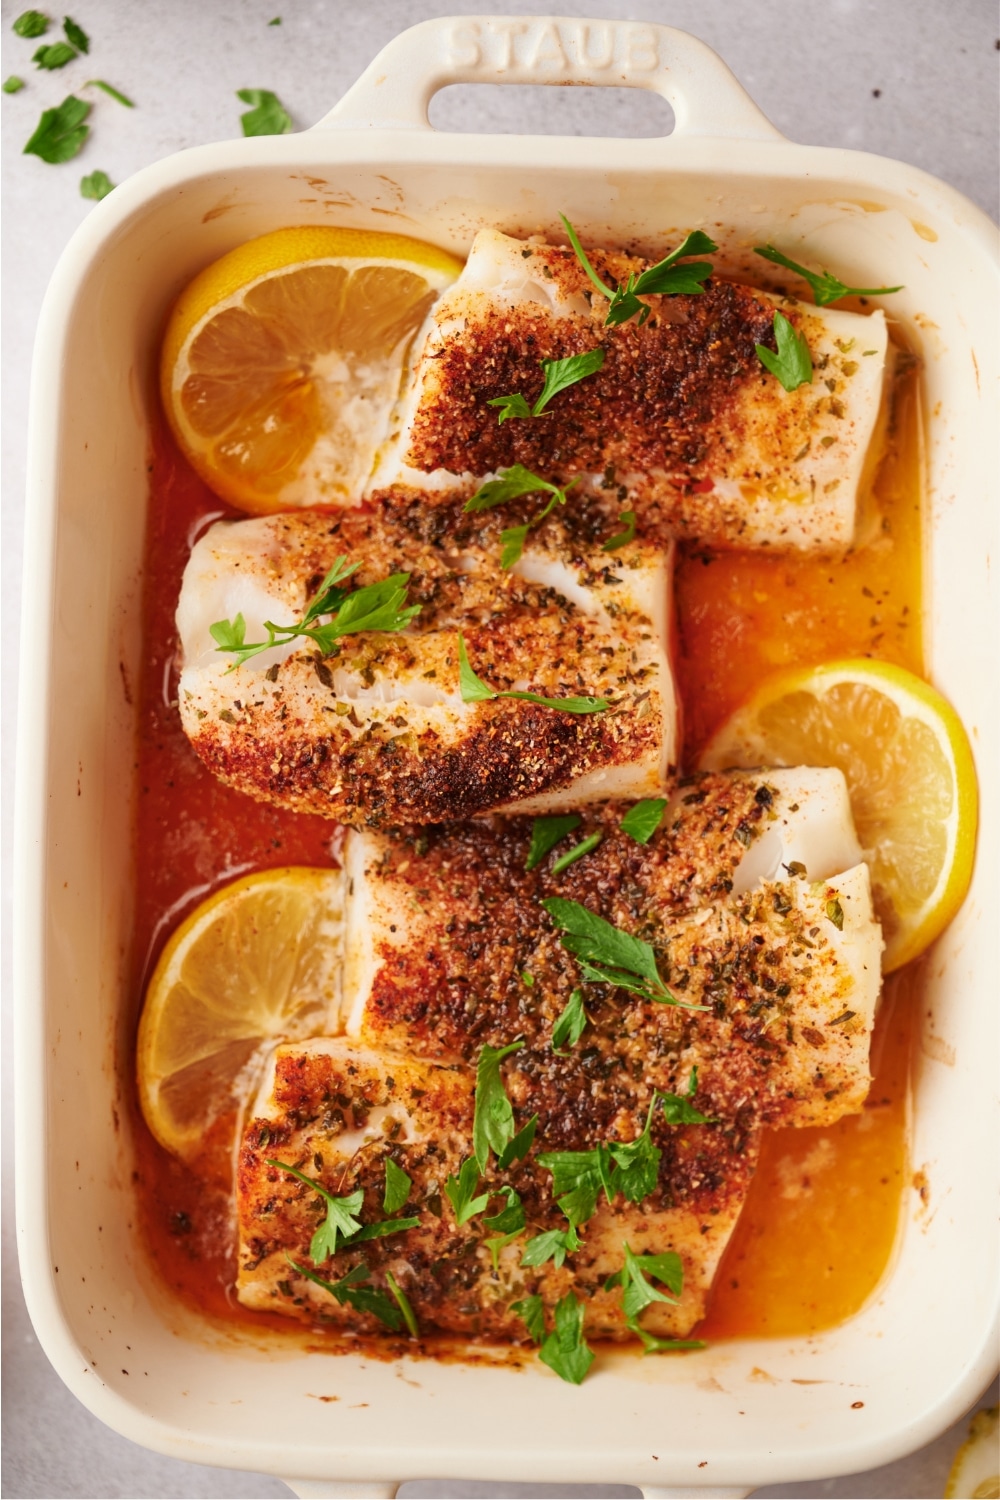 Seasoning on top of four mahi mahi fillets in a white baking dish that has three lemon slices. The dish is on a white counter.